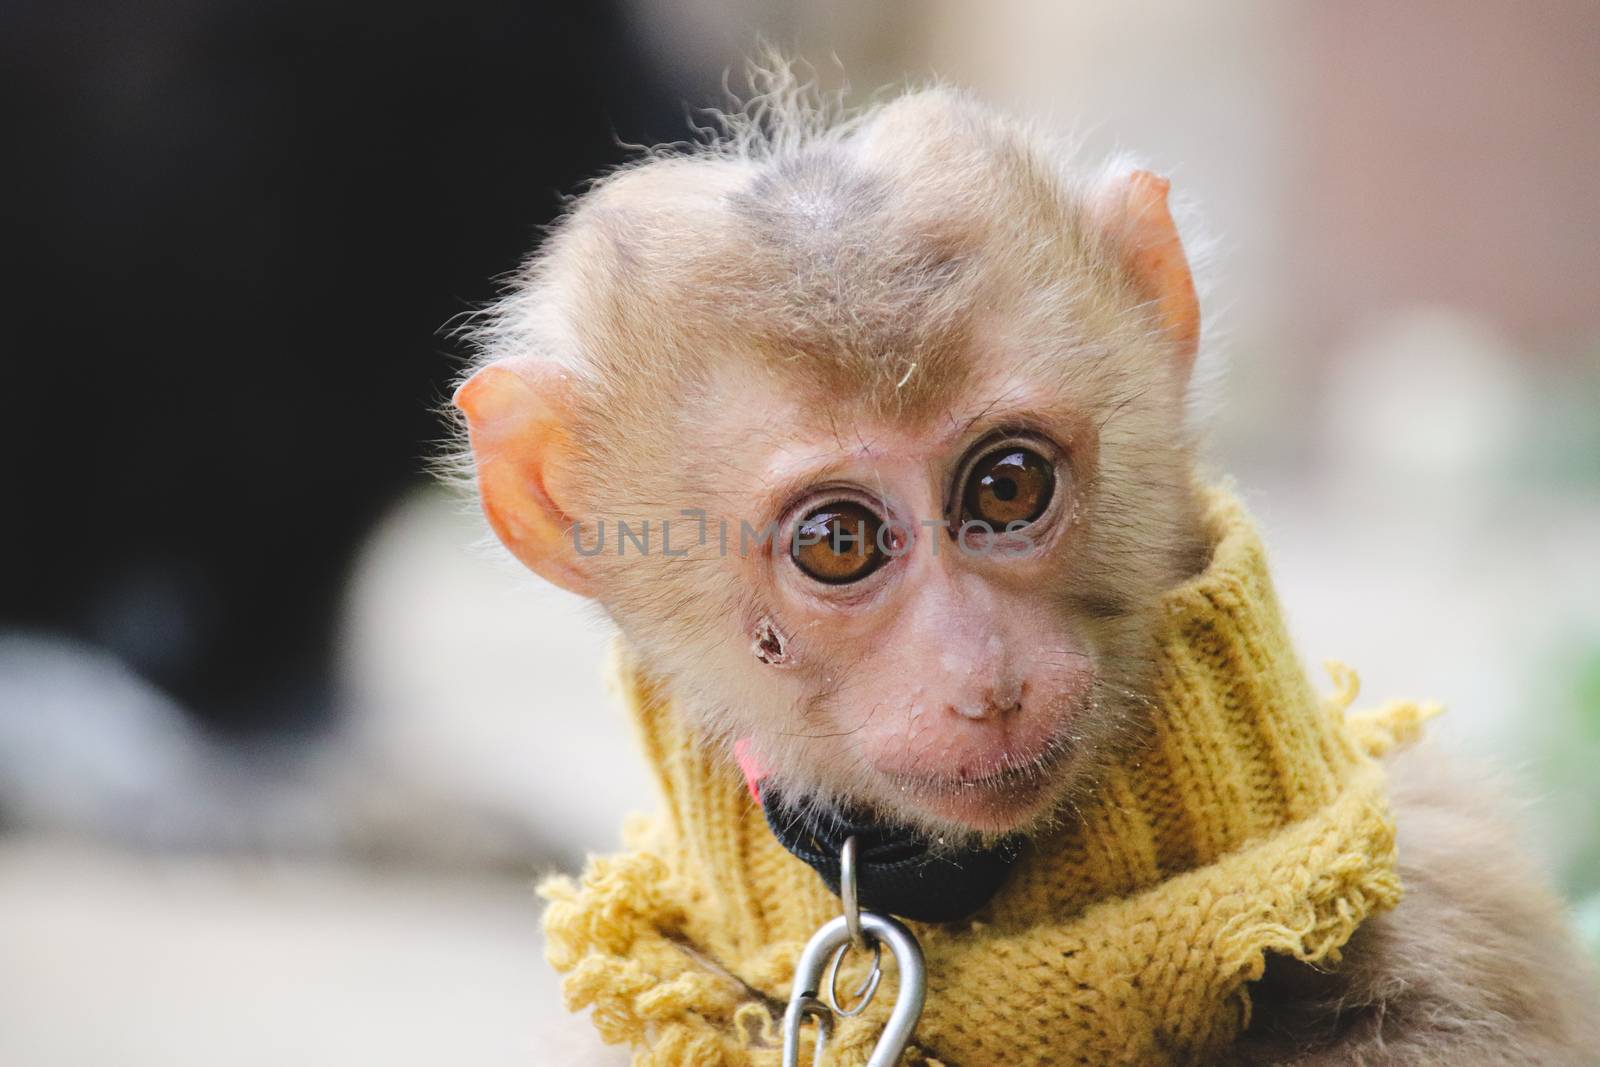 A baby monkey in chains by Sonnet15